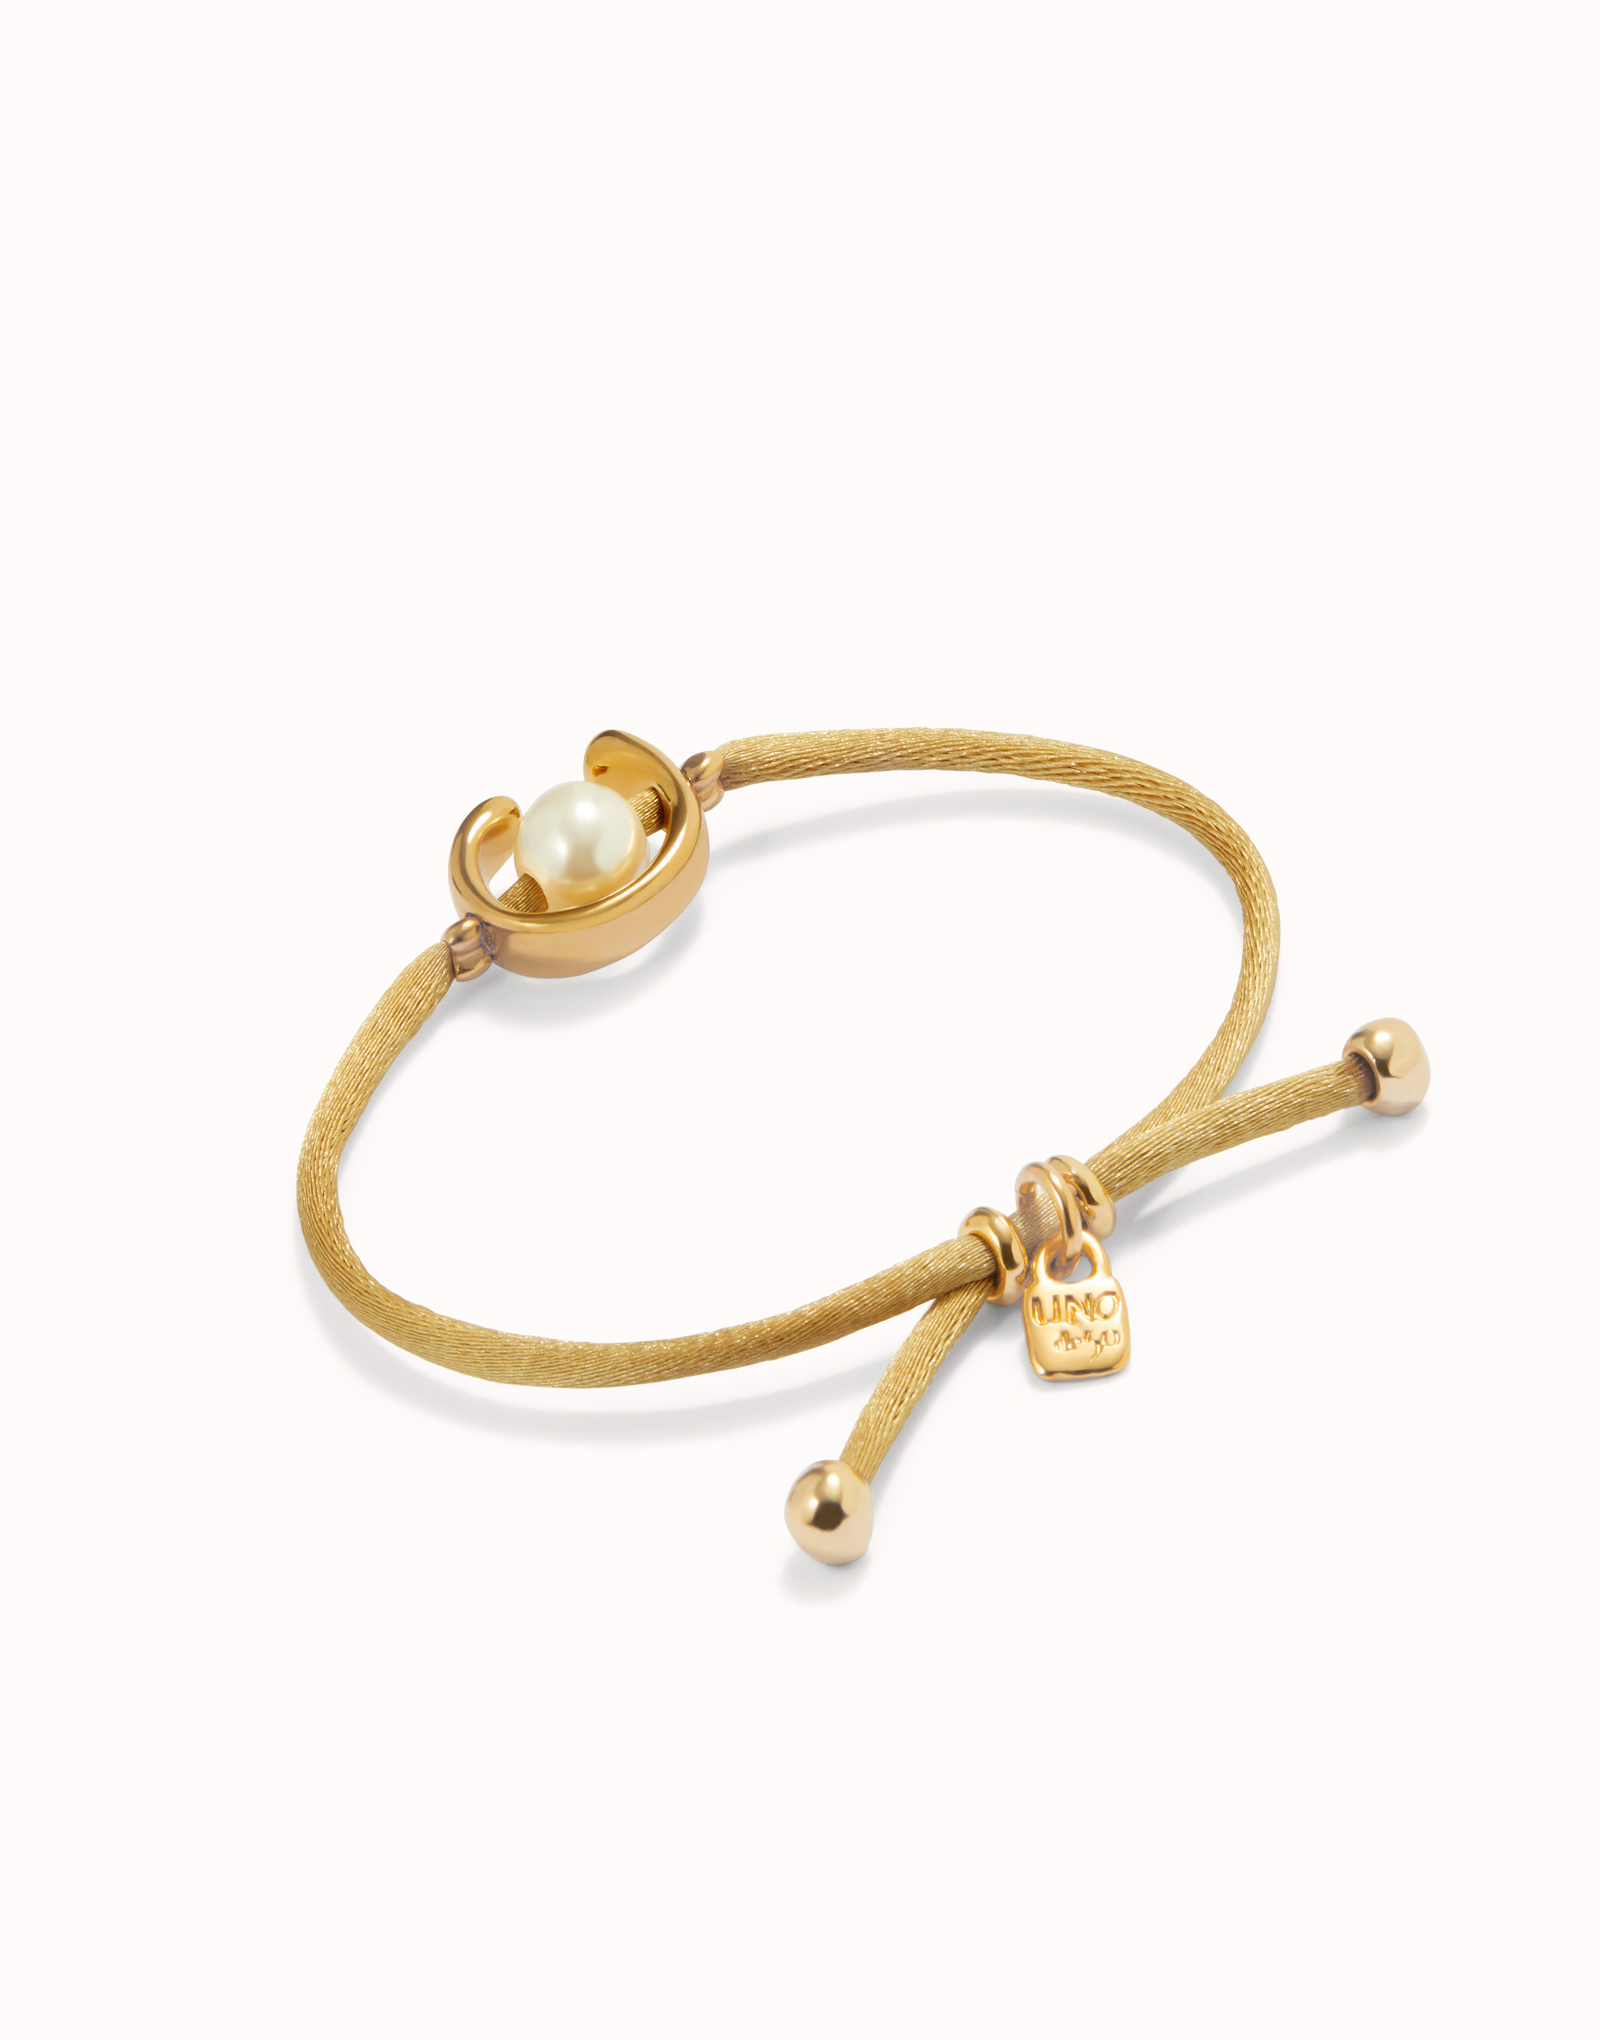 18K gold-plated camel thread bracelet with shell pearl accessory., Golden, large image number null